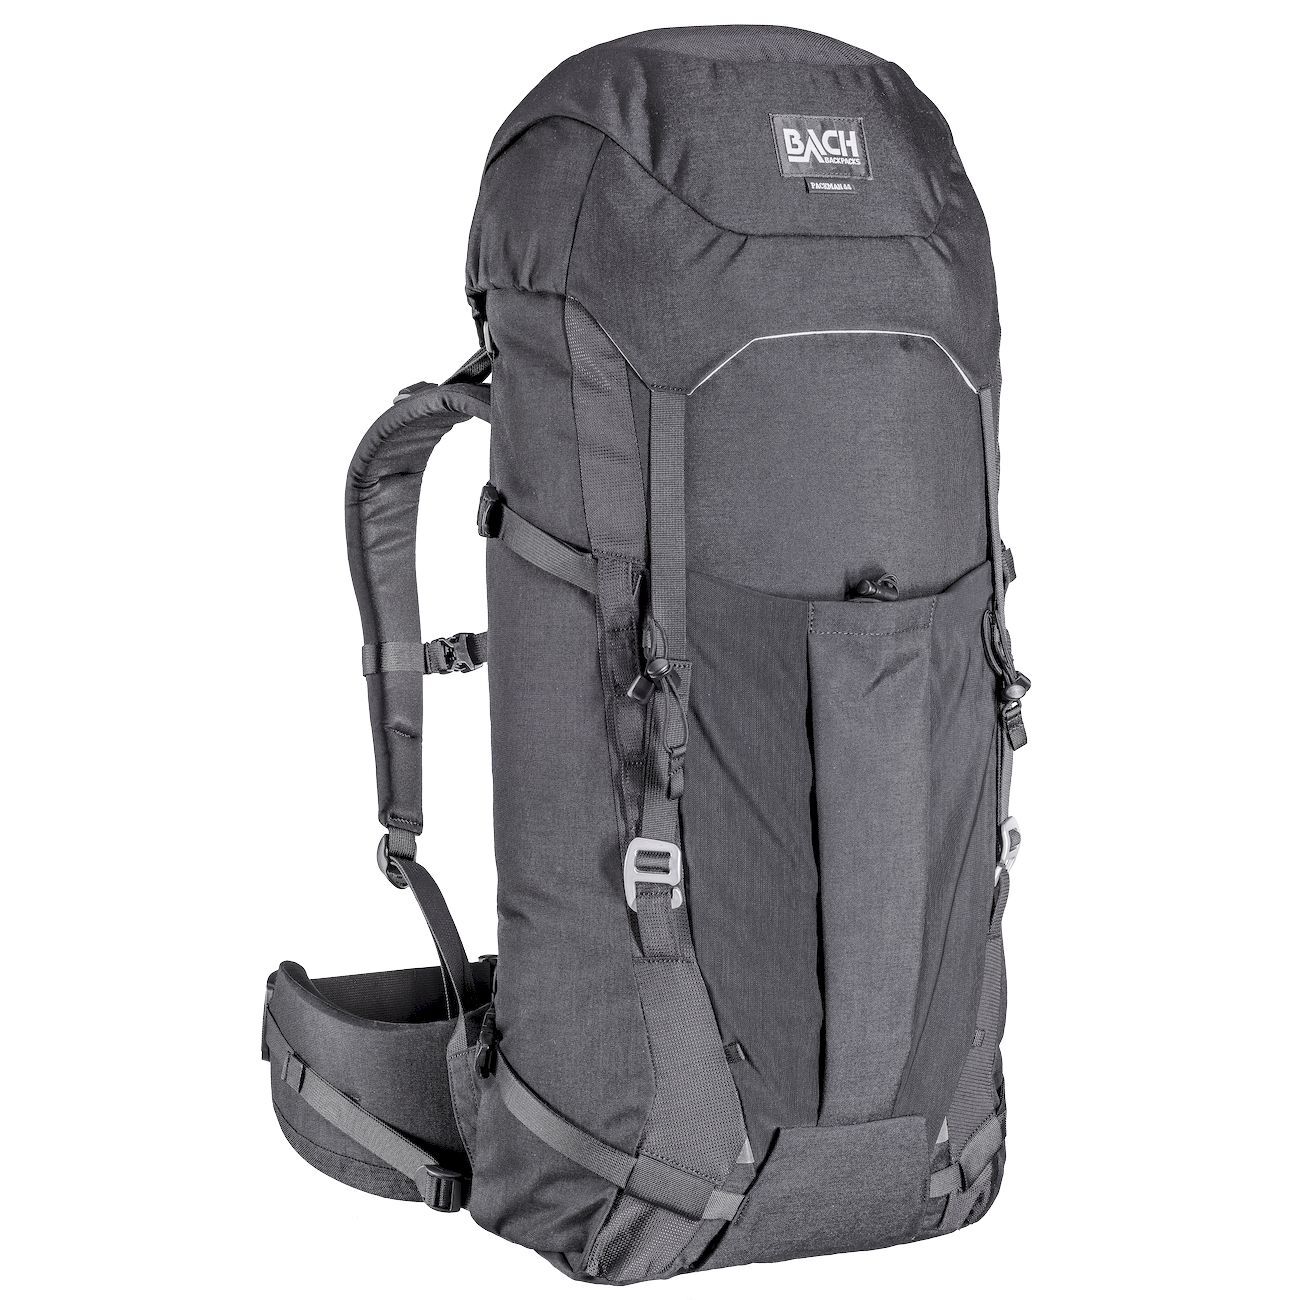 Bach Pack Packman 44 - Hiking backpack